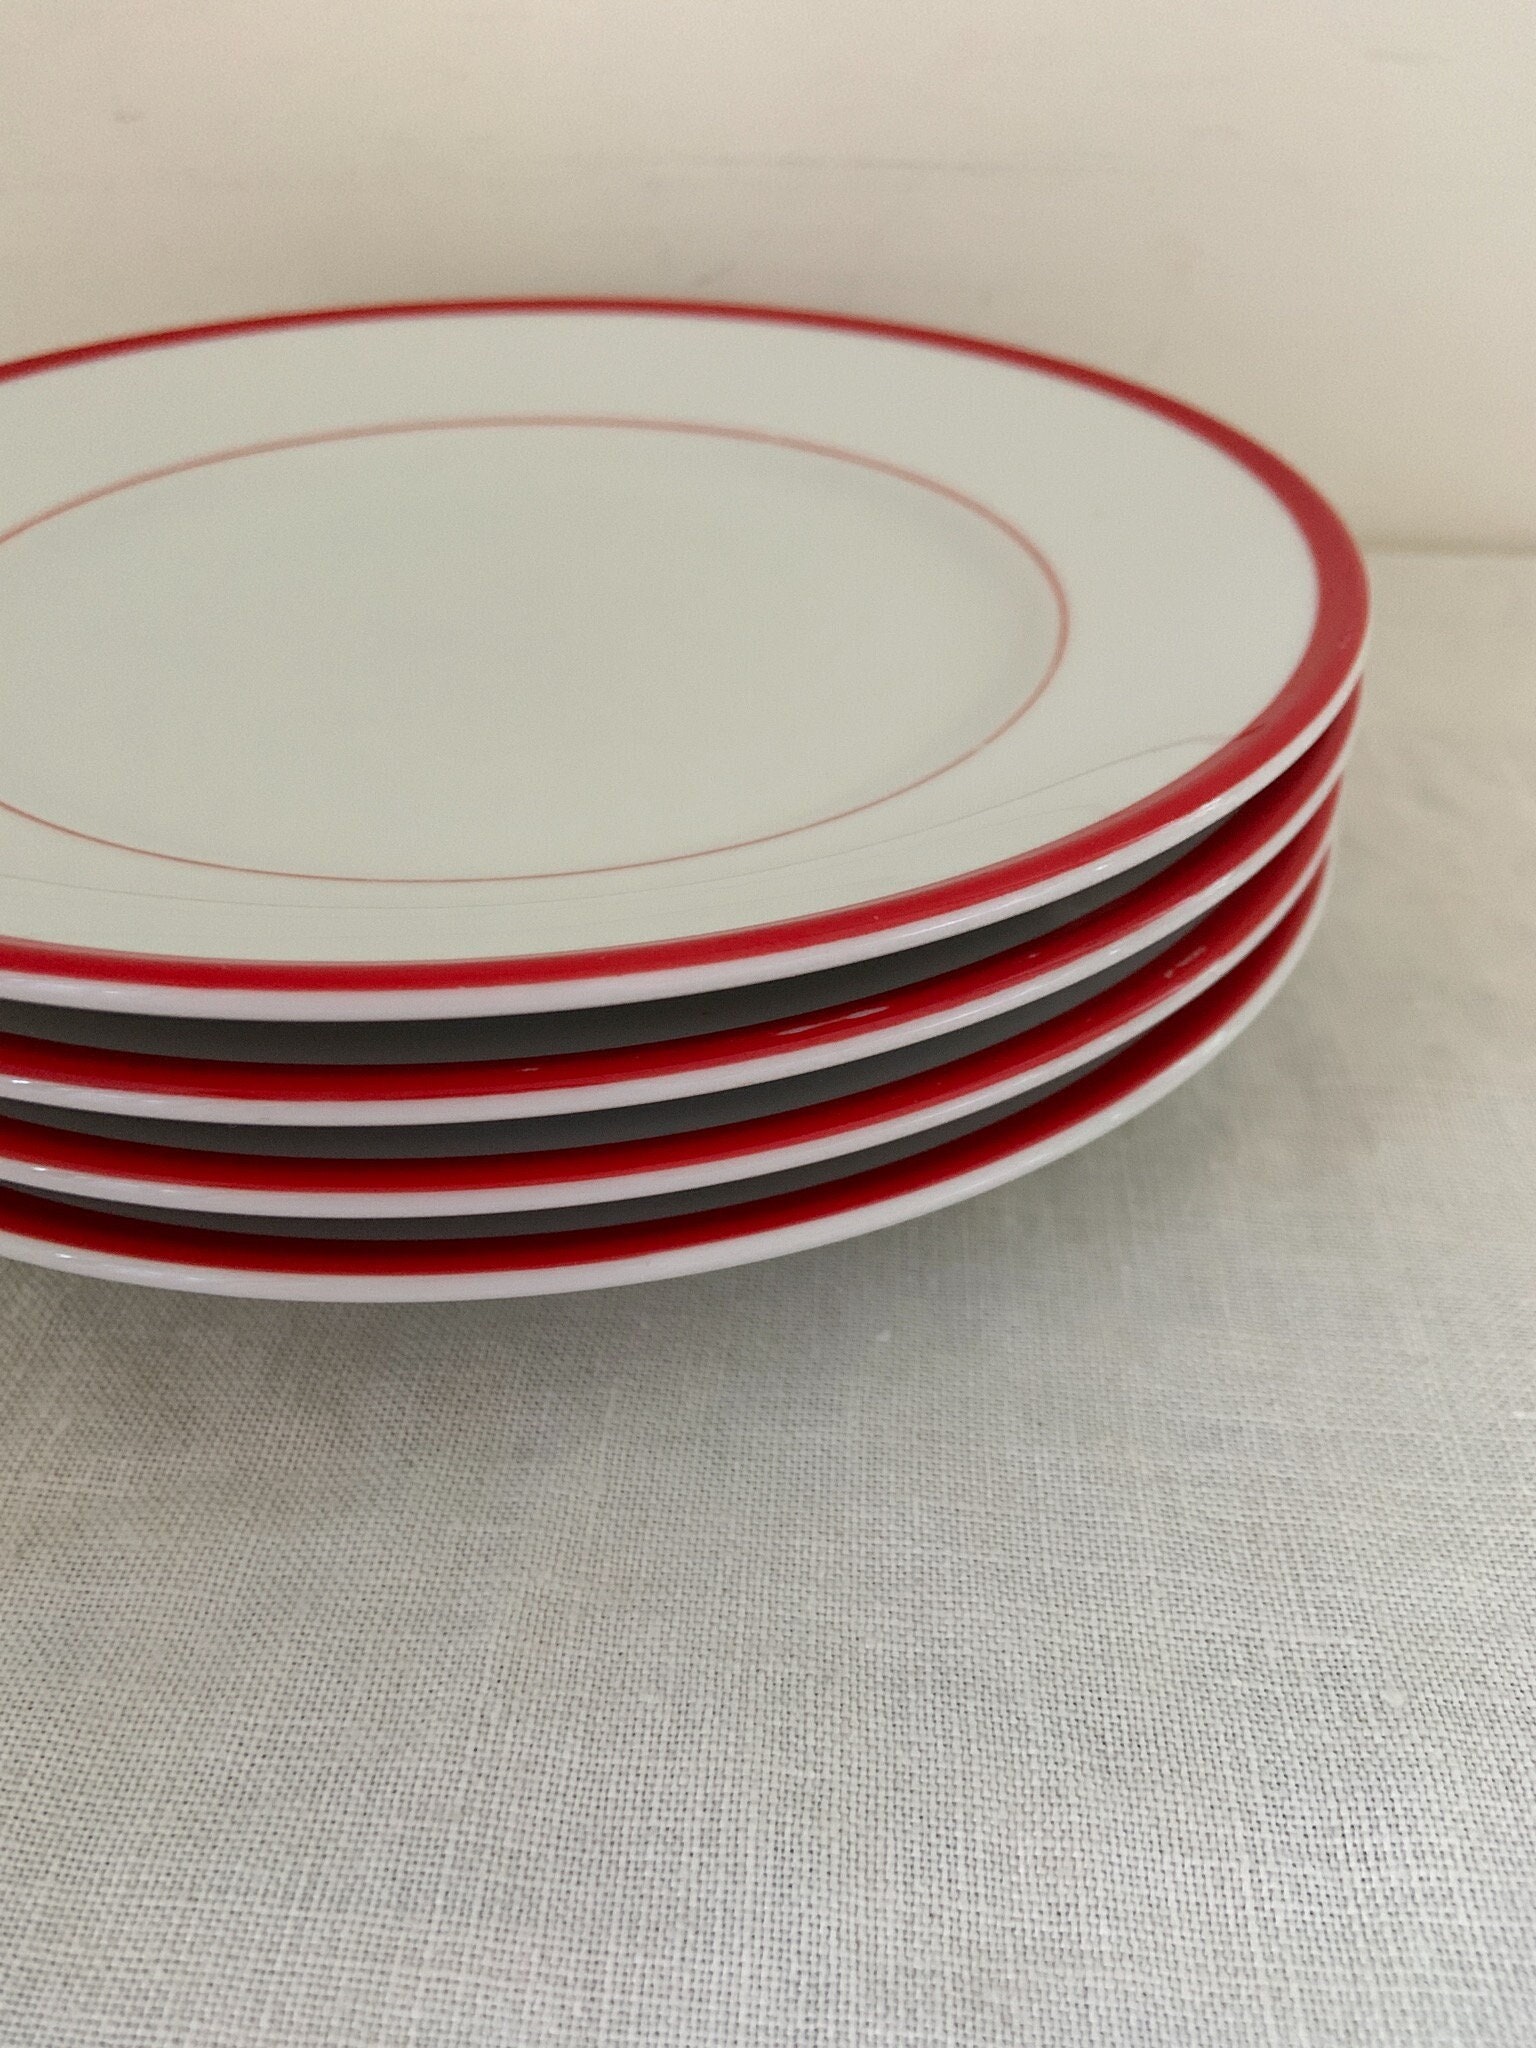 Brasserie Red Salad Plates Set of 4 by Williams Sonoma -  Canada